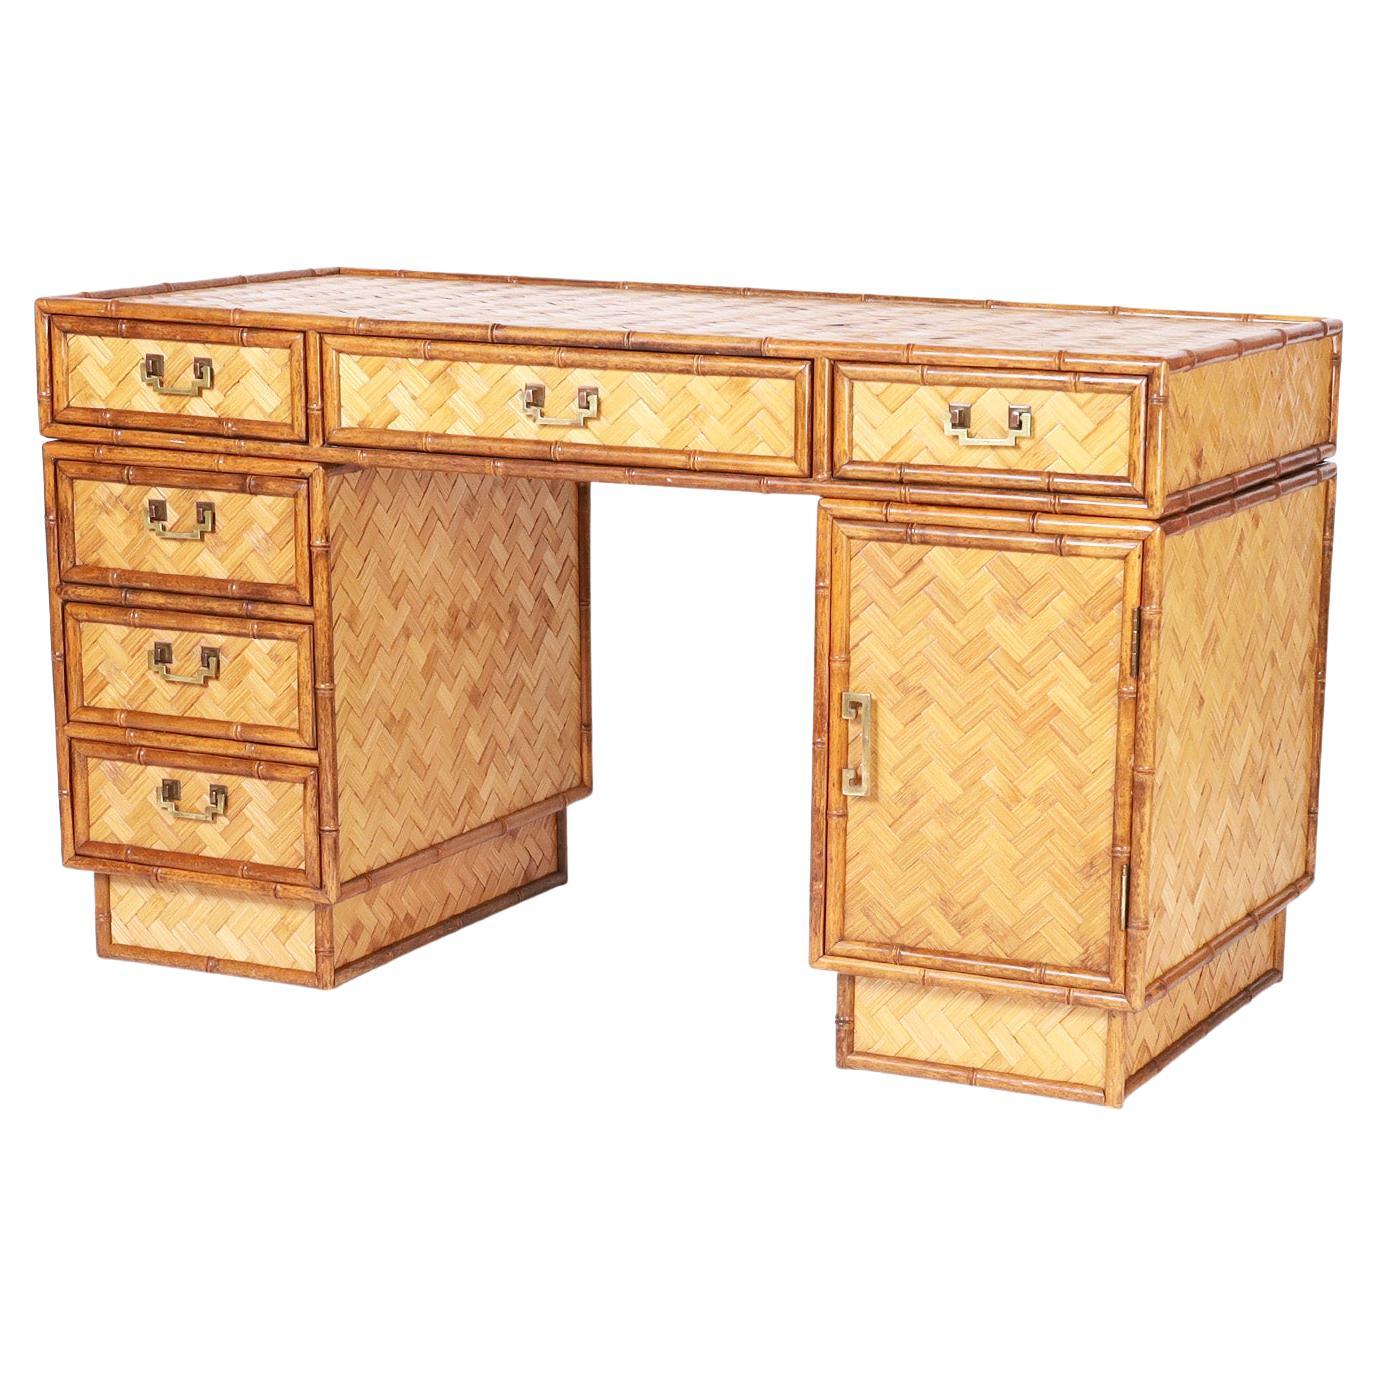 British Colonial Style Faux Bamboo and Reed Desk